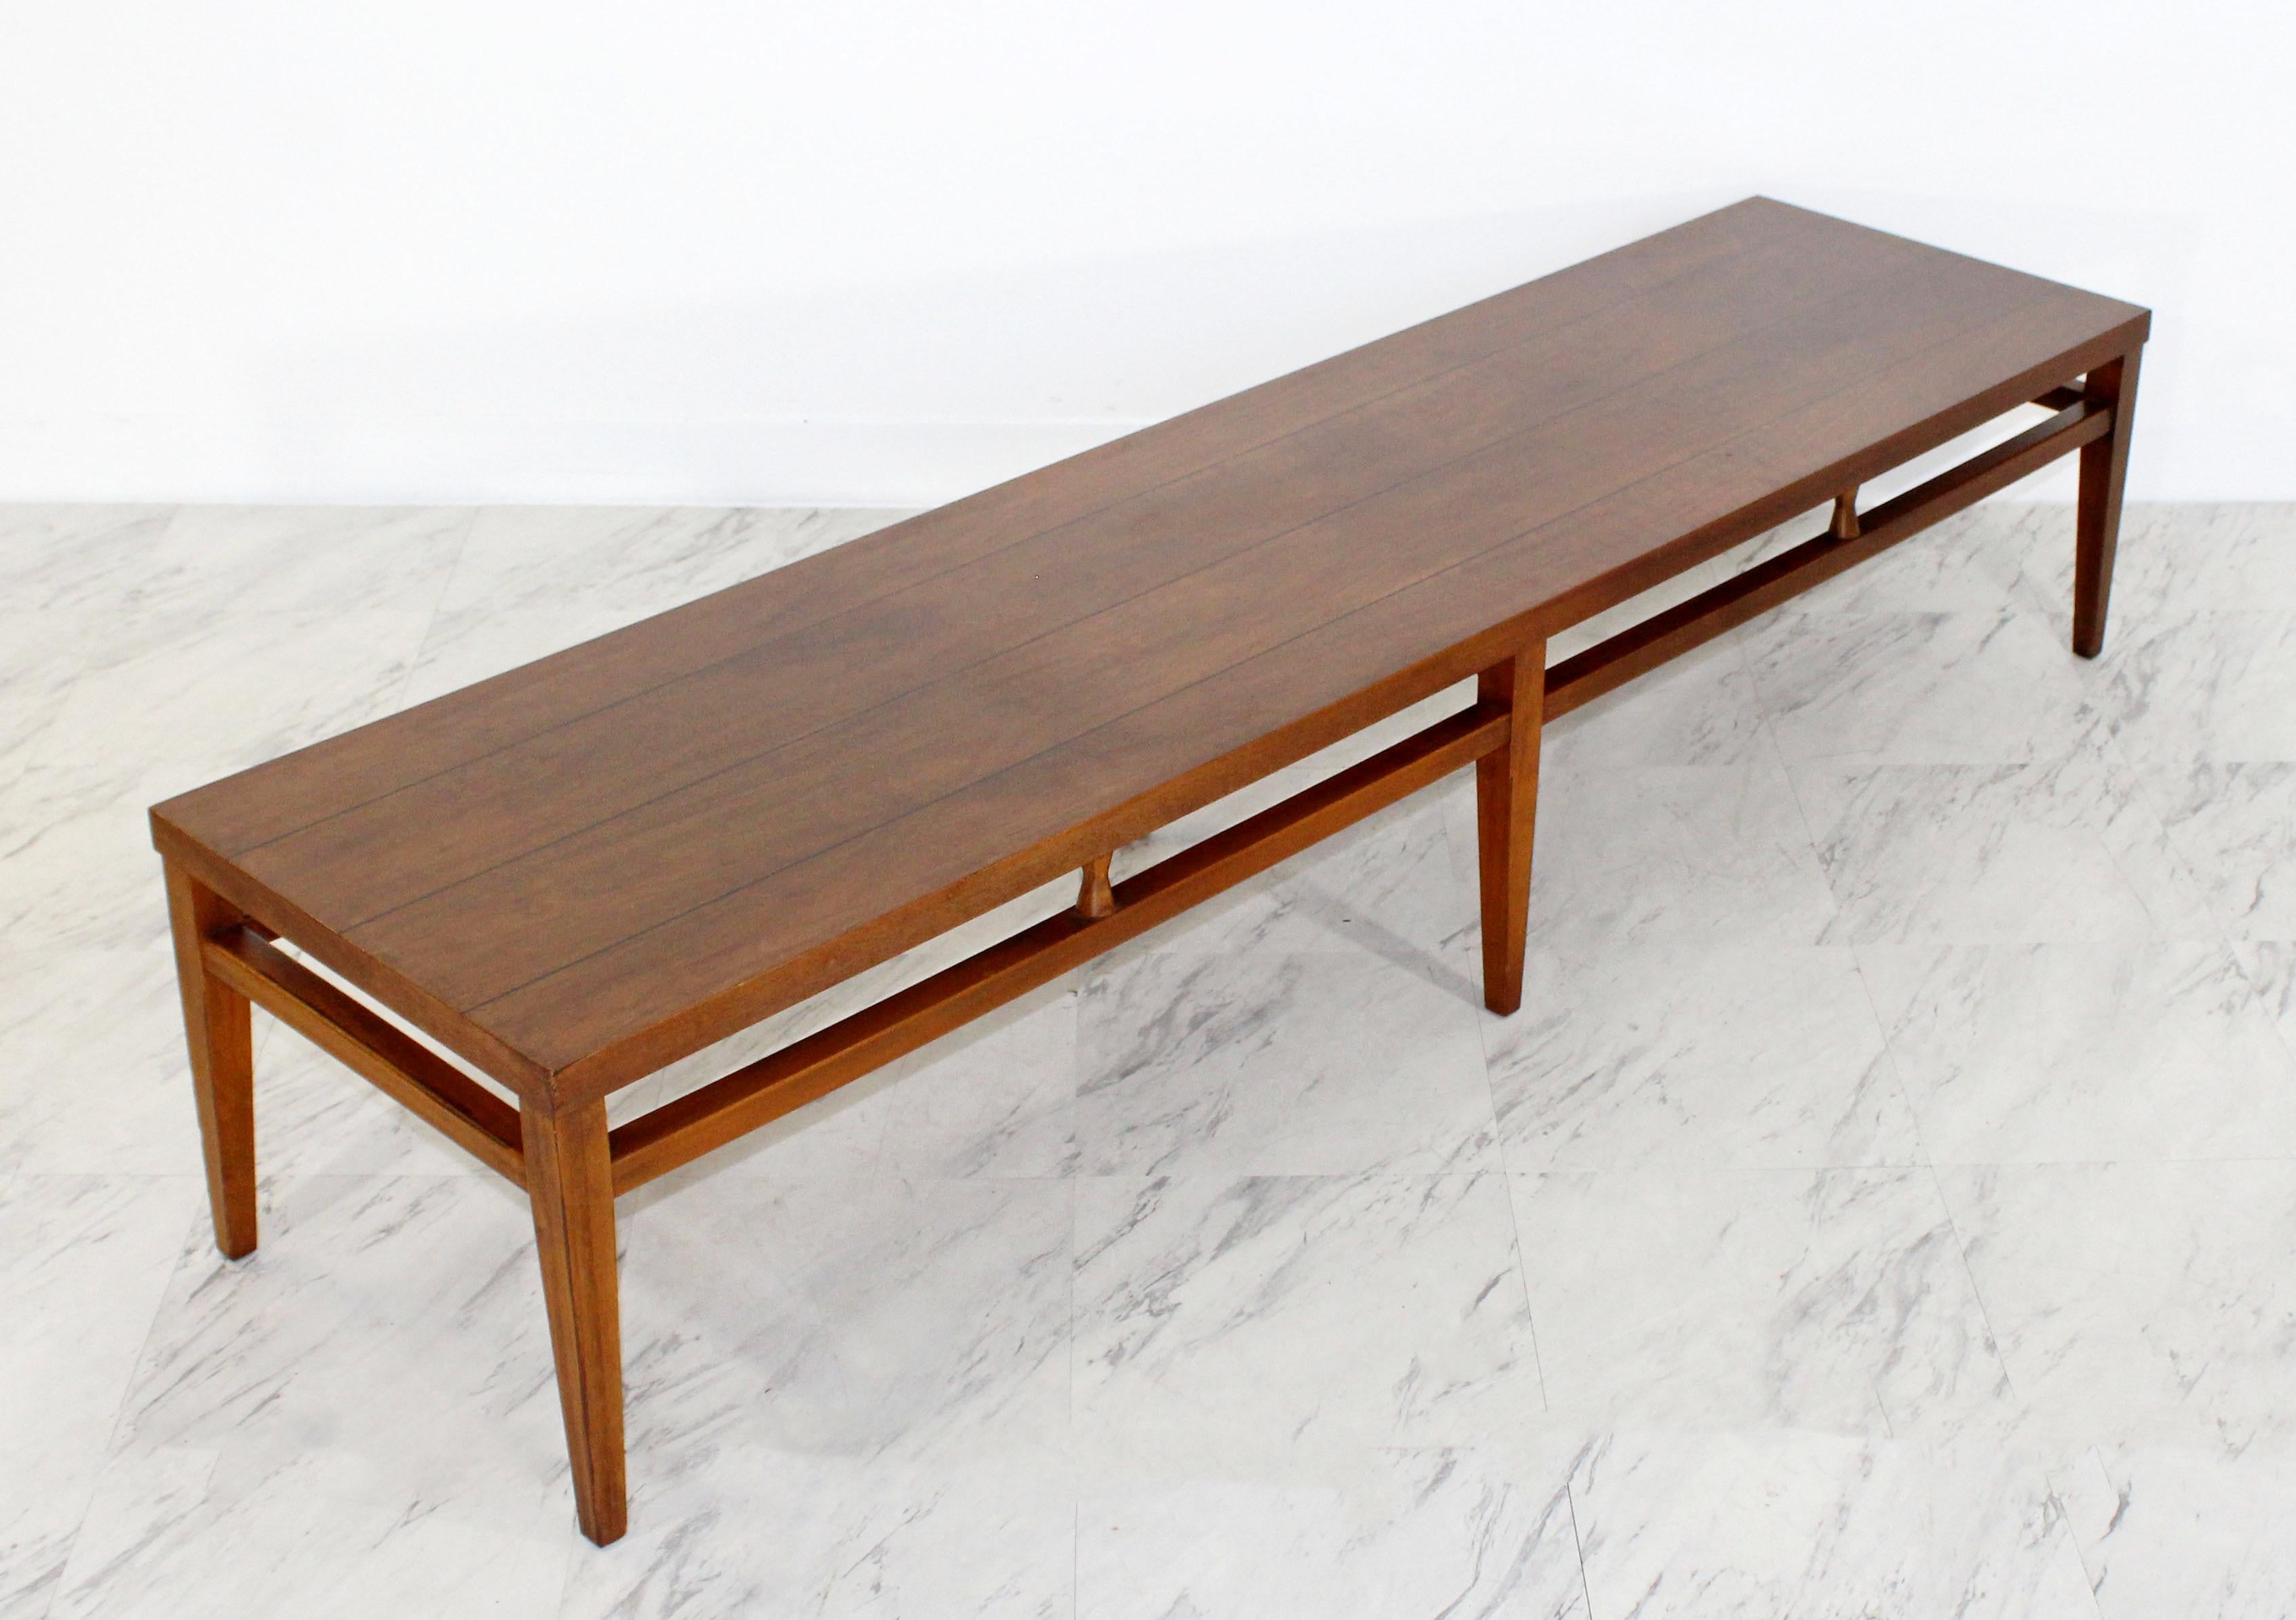 For your consideration is a lovely, long, low coffee table bench, from the Tuxedo line by Lane, circa the 1950s. In excellent condition. The dimensions are 68